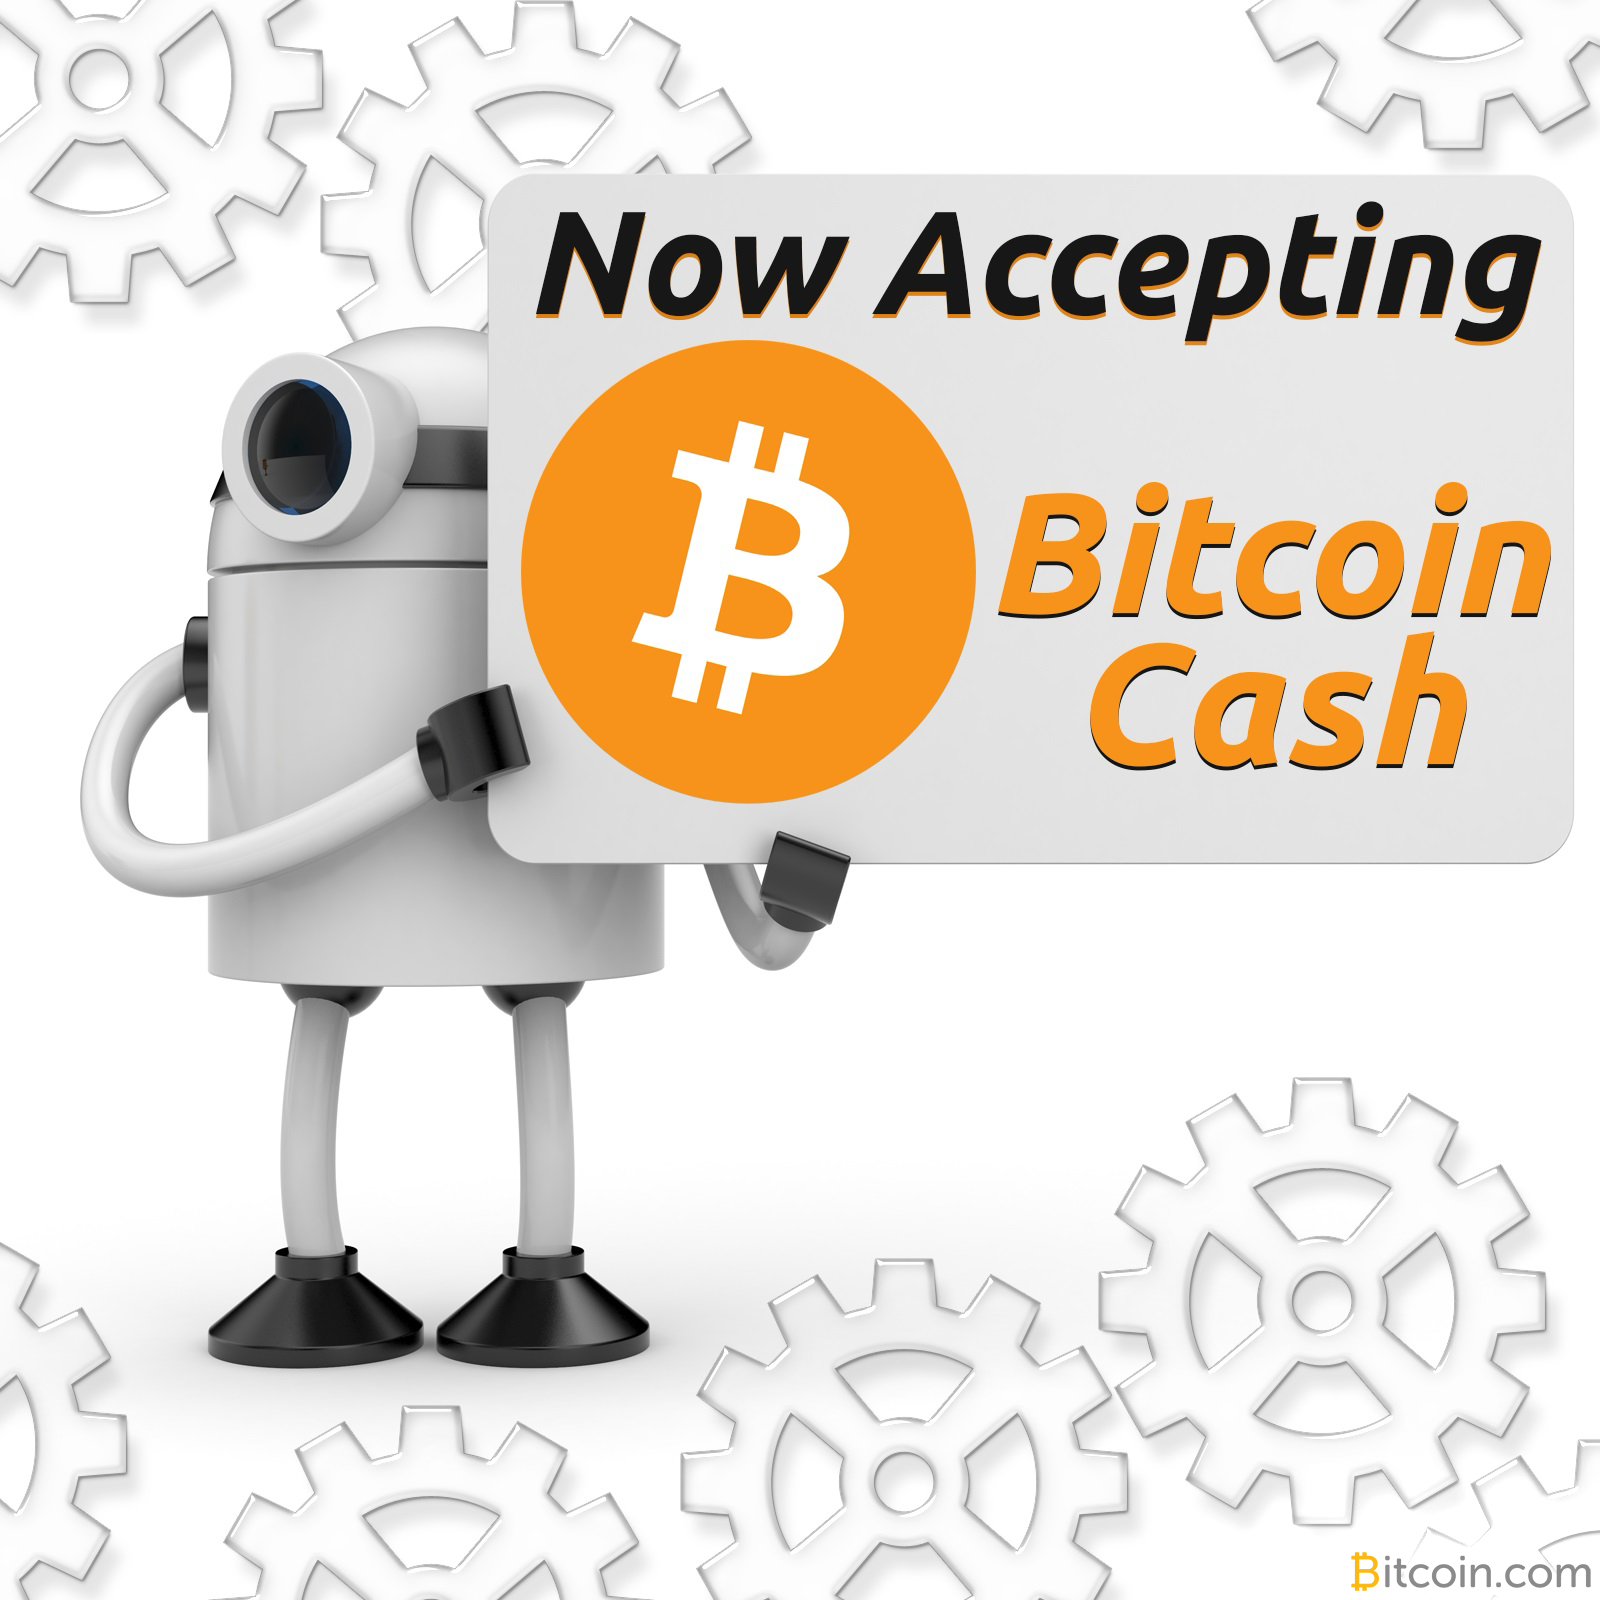 Bitcoin Cash Gains More Support